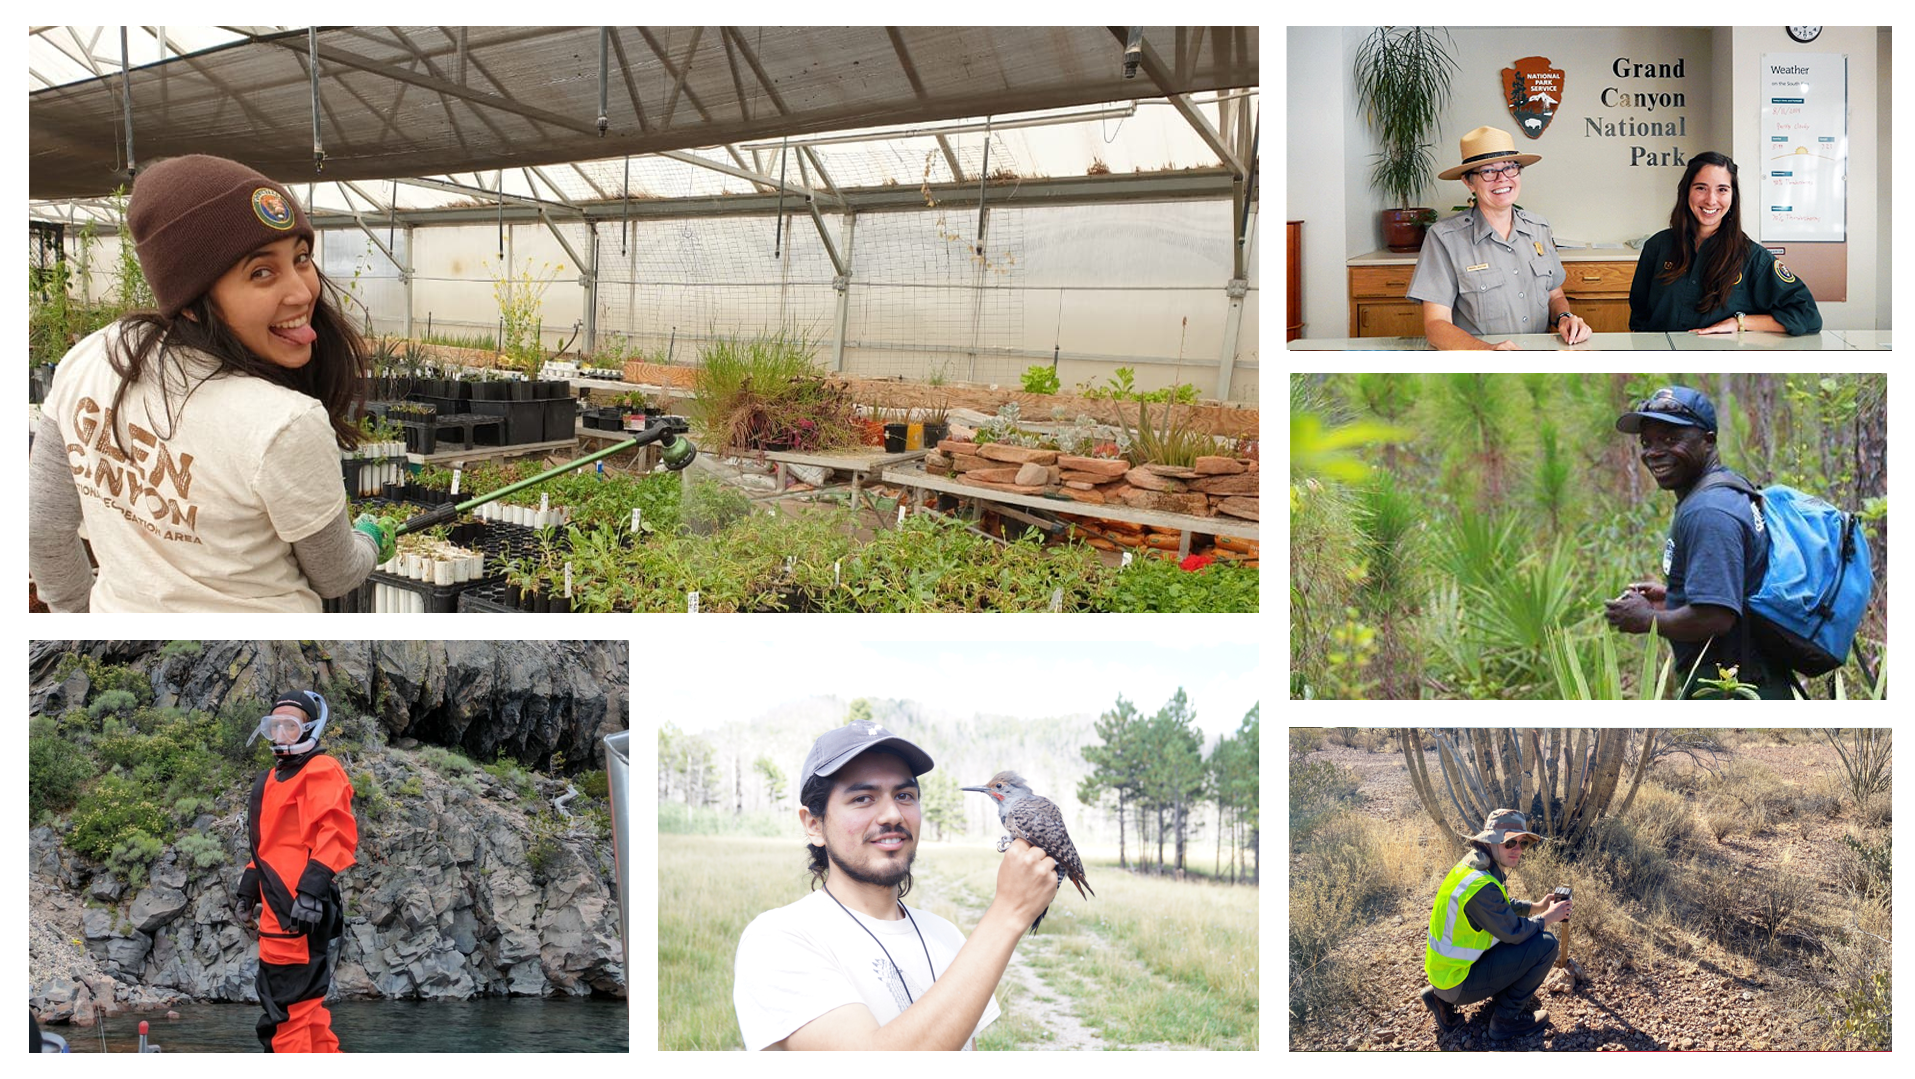 Collage of images of international volunteers doing a variety of tasks in parks, including in a greenhouse, at visitor center desk, fieldwork in deserts, holding a bird, and in diving gear